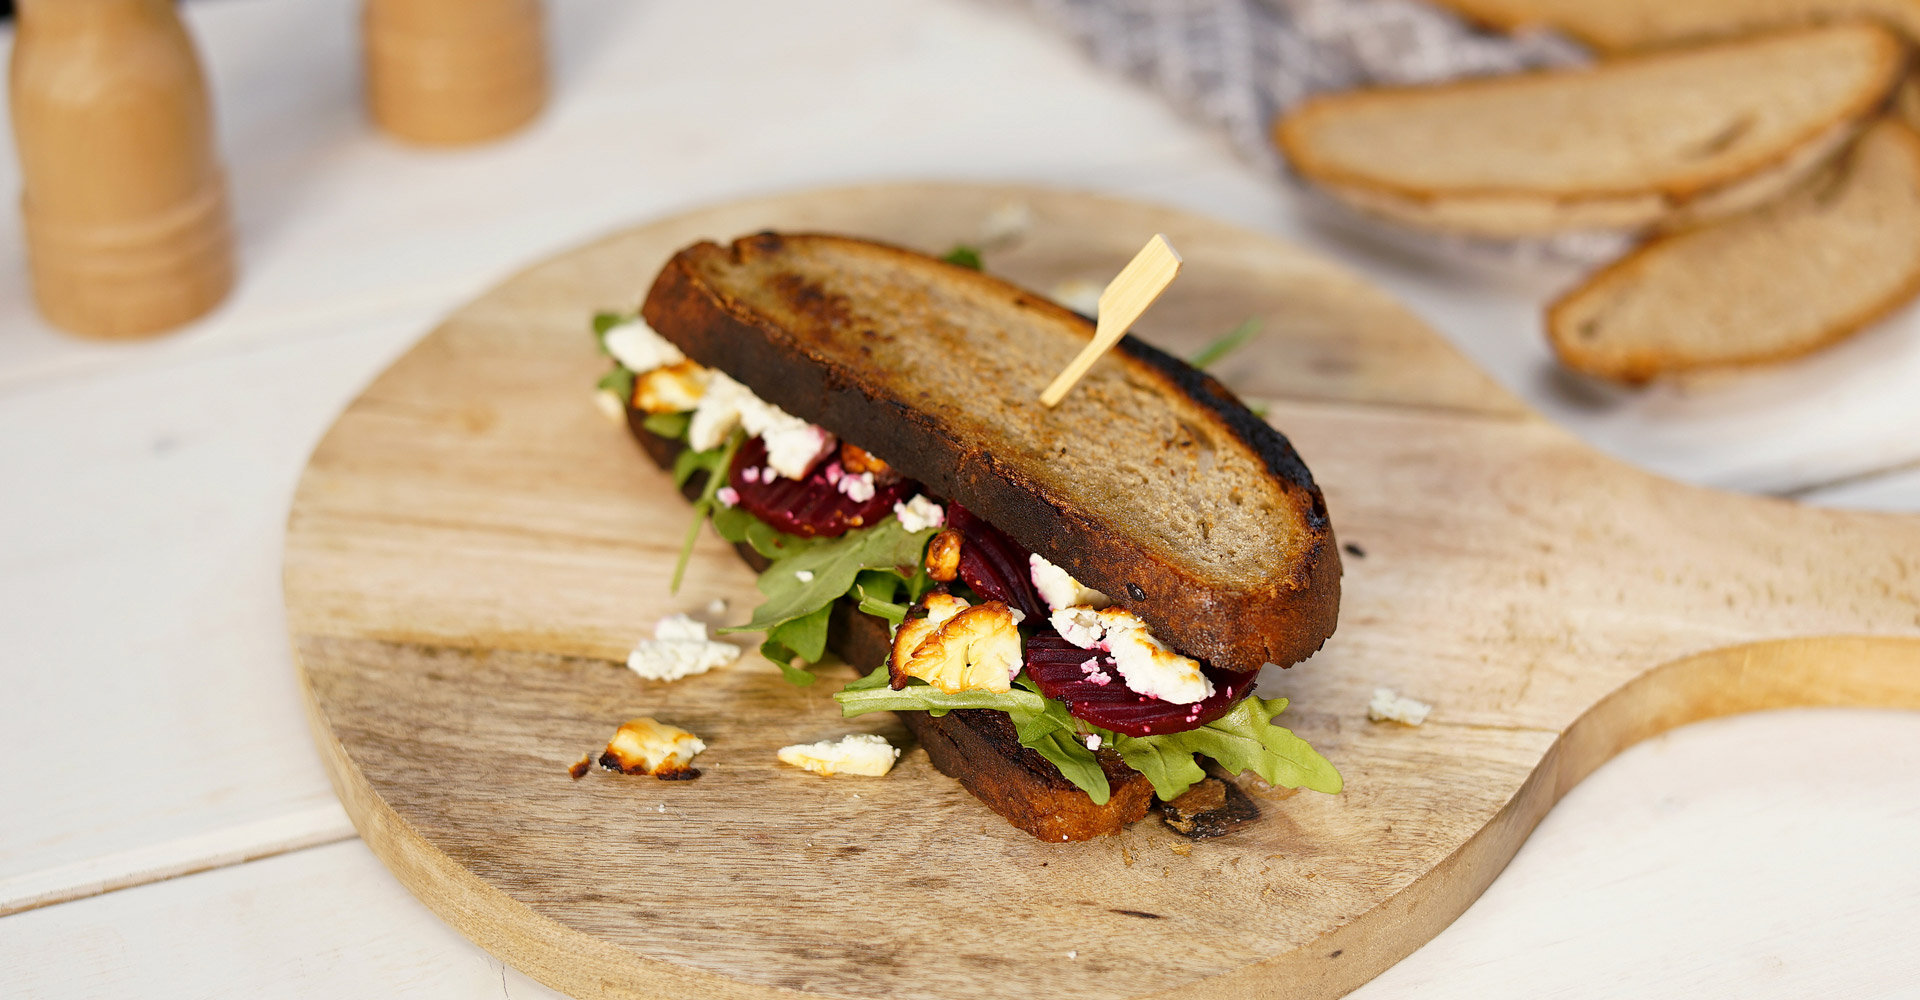 Beetroot sandwich with baked feta and rocket salad